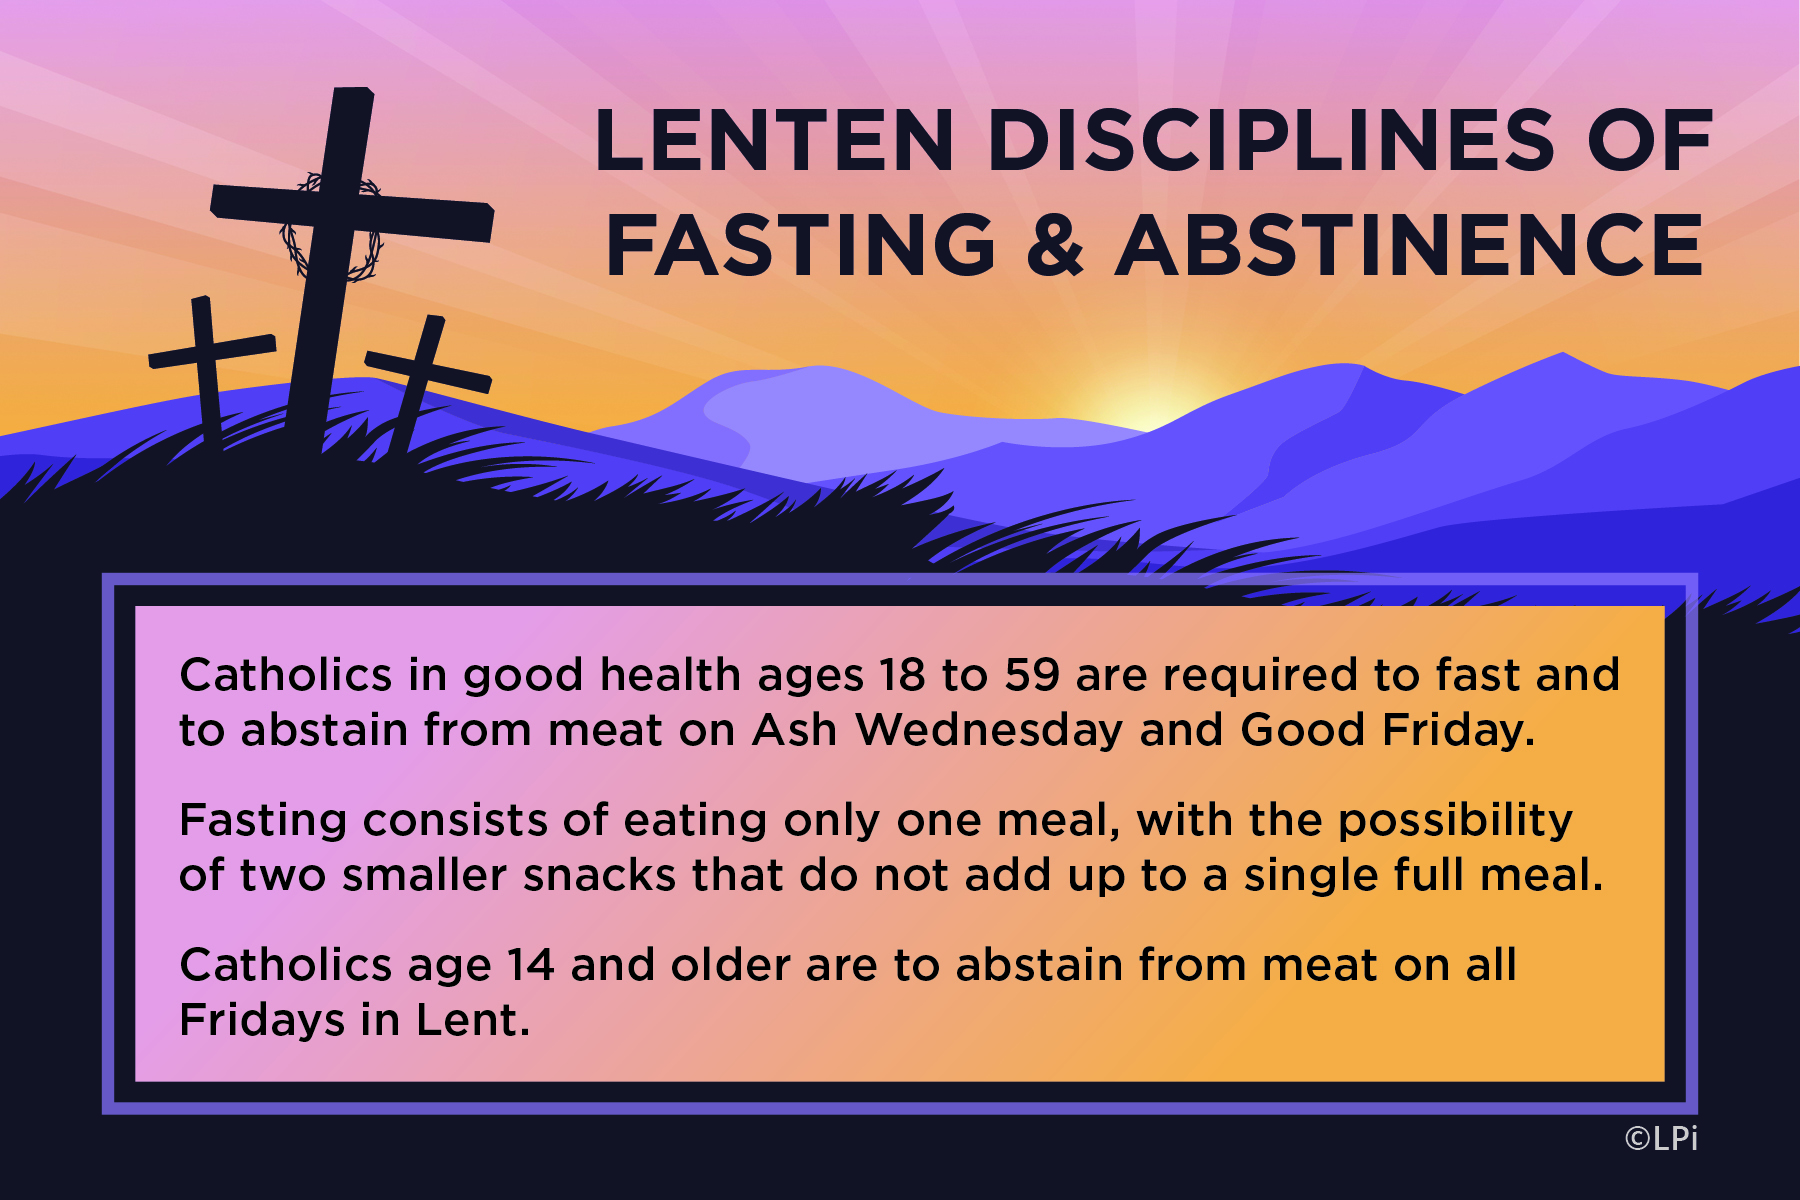 Lenten Fasting and Abstinence